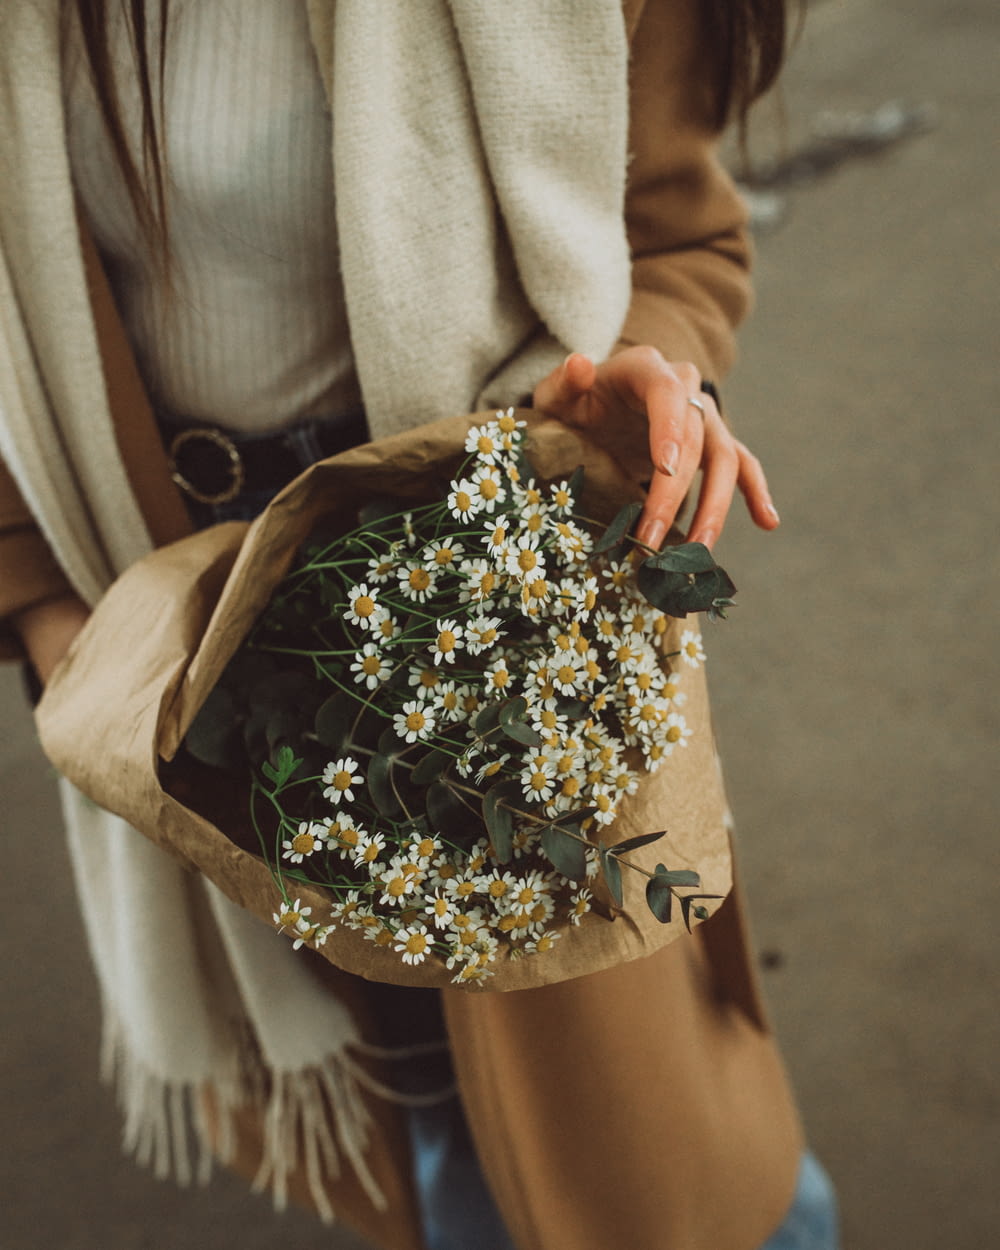 a woman is holding a bouquet of daisies